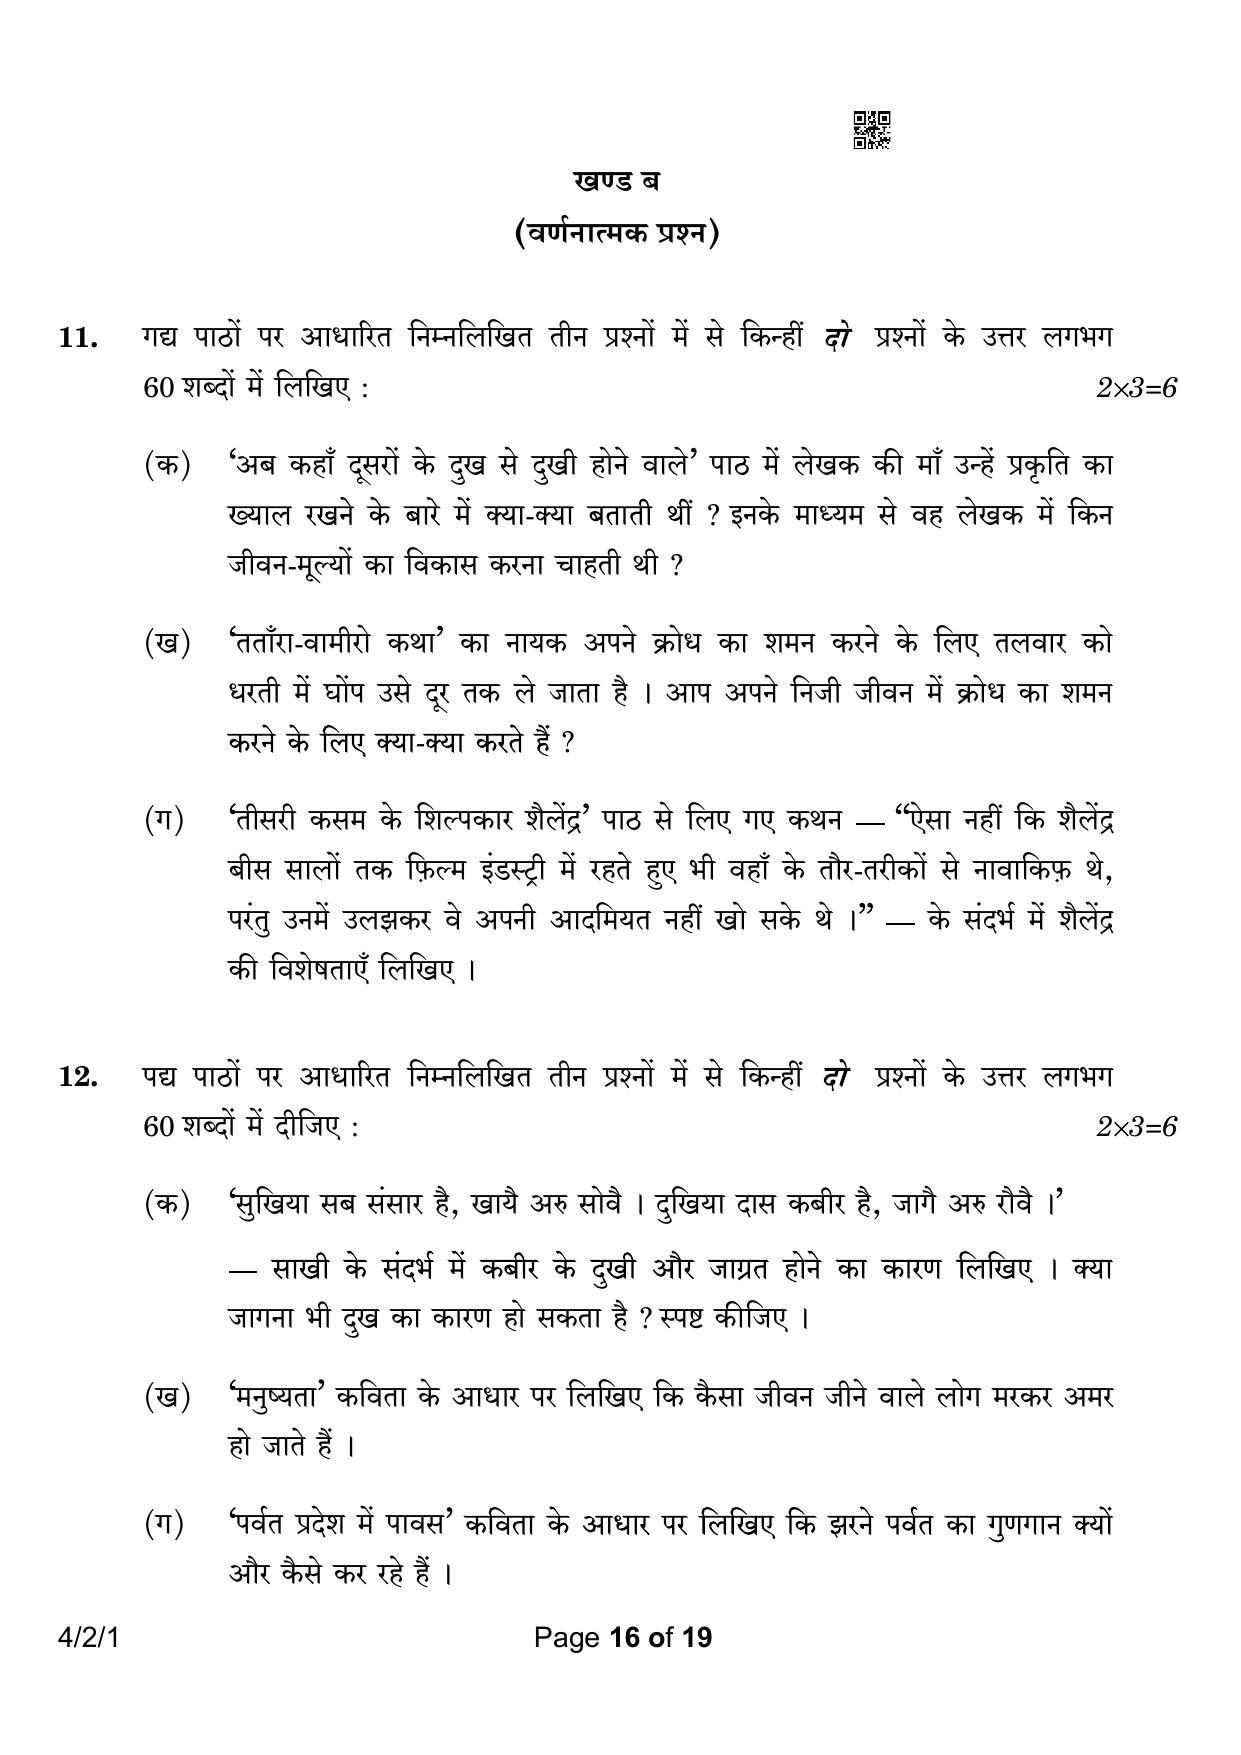 CBSE Class 10 4-2-1 Hindi B 2023 Question Paper - Page 16